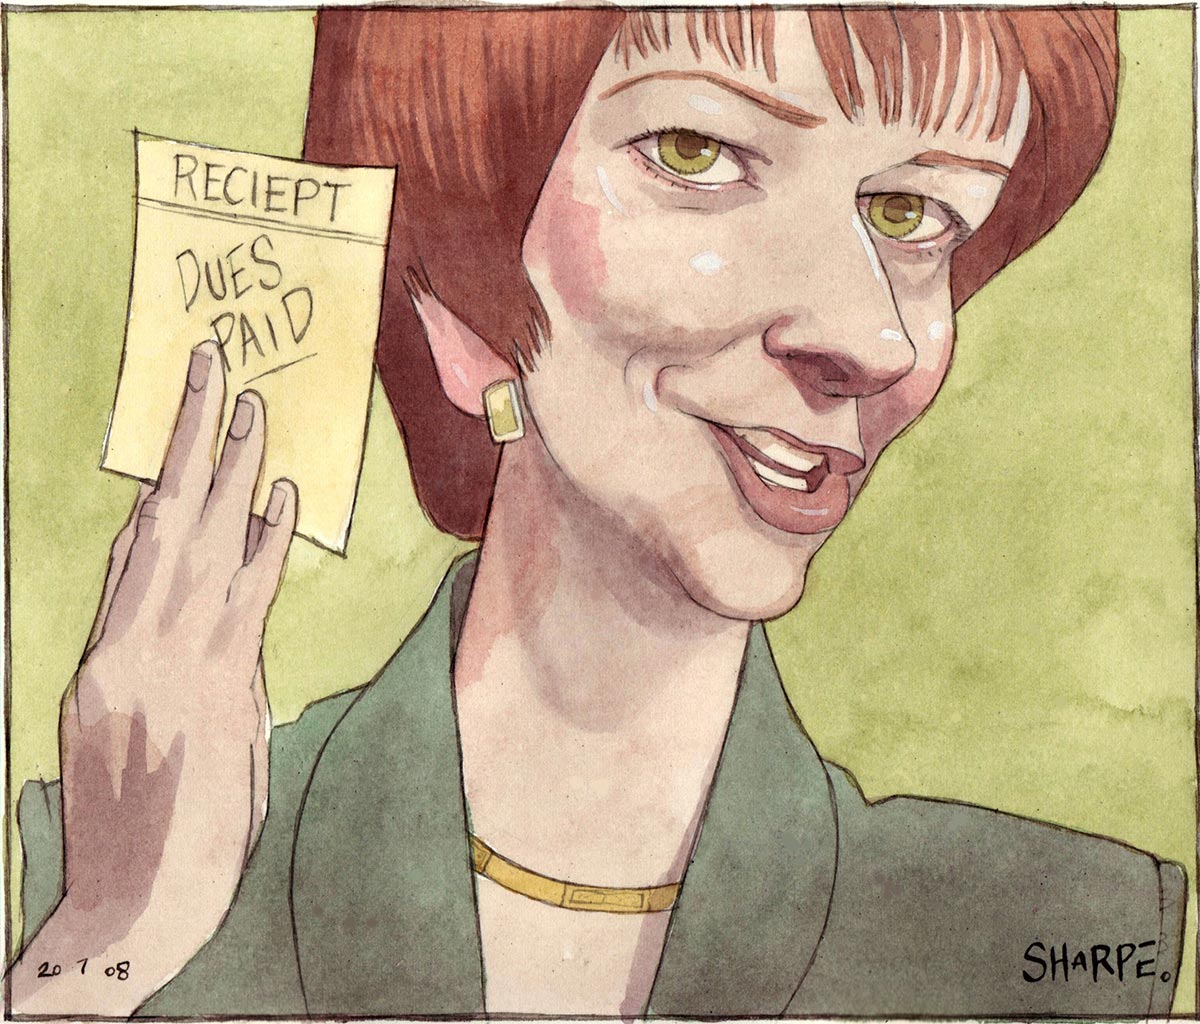 Political cartoon showing Julia Gillard's head and shoulders, her right hand is up and carrying a piece of paper which reads 'Reciept (sic): dues paid'. Gillard looks triumphant. She wears a green suit and gold necklace. - click to view larger image